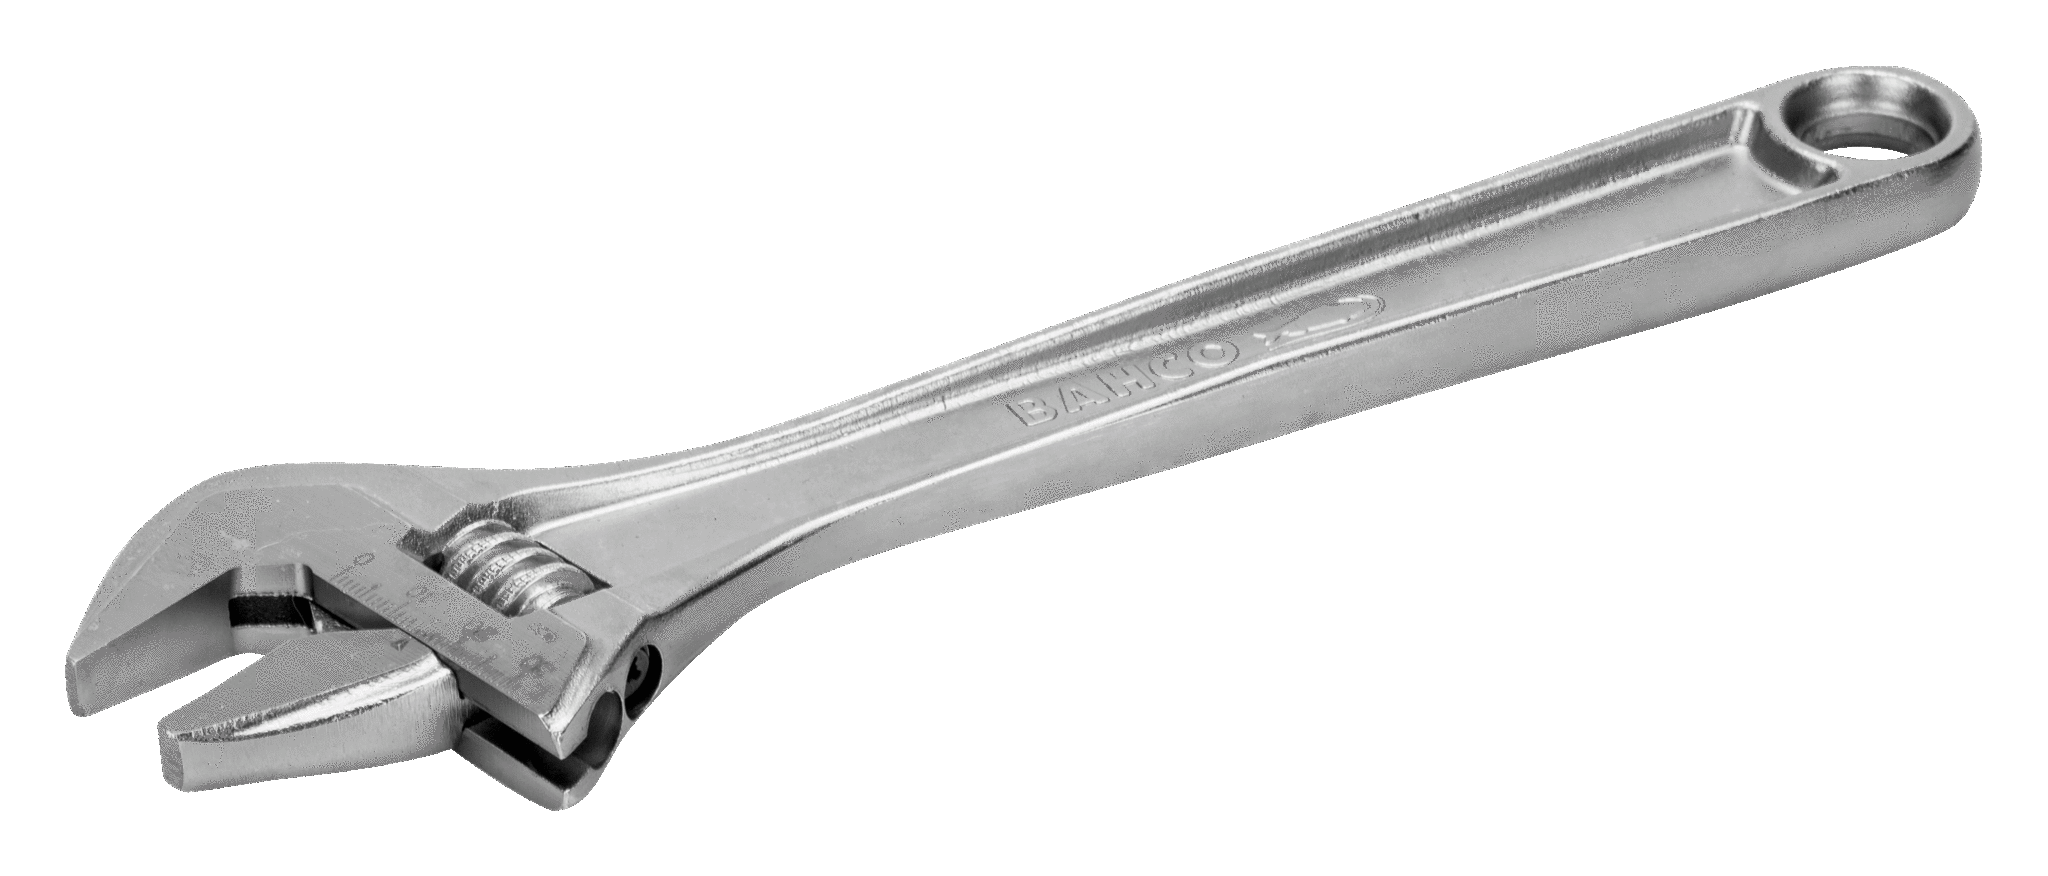 Bahco 8075 IR8075 C IP Adjustable Wrench in Industrial Pack 18-Inch Silver 53 mm 